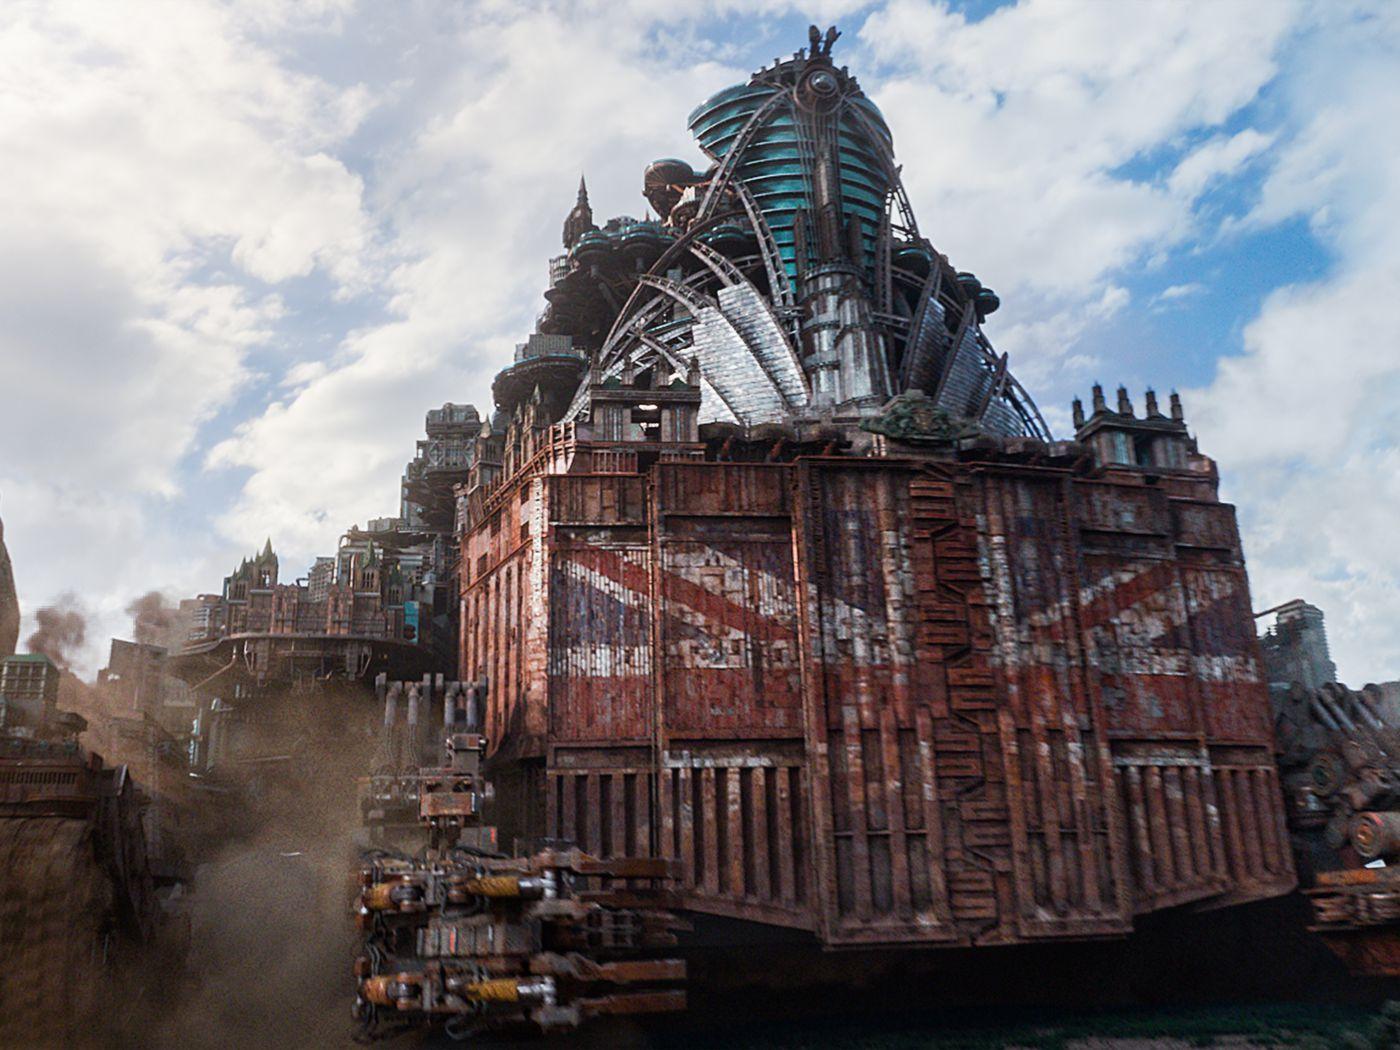 Mortal Engines review: Peter Jackson's new fantasy thrills like Mad Max